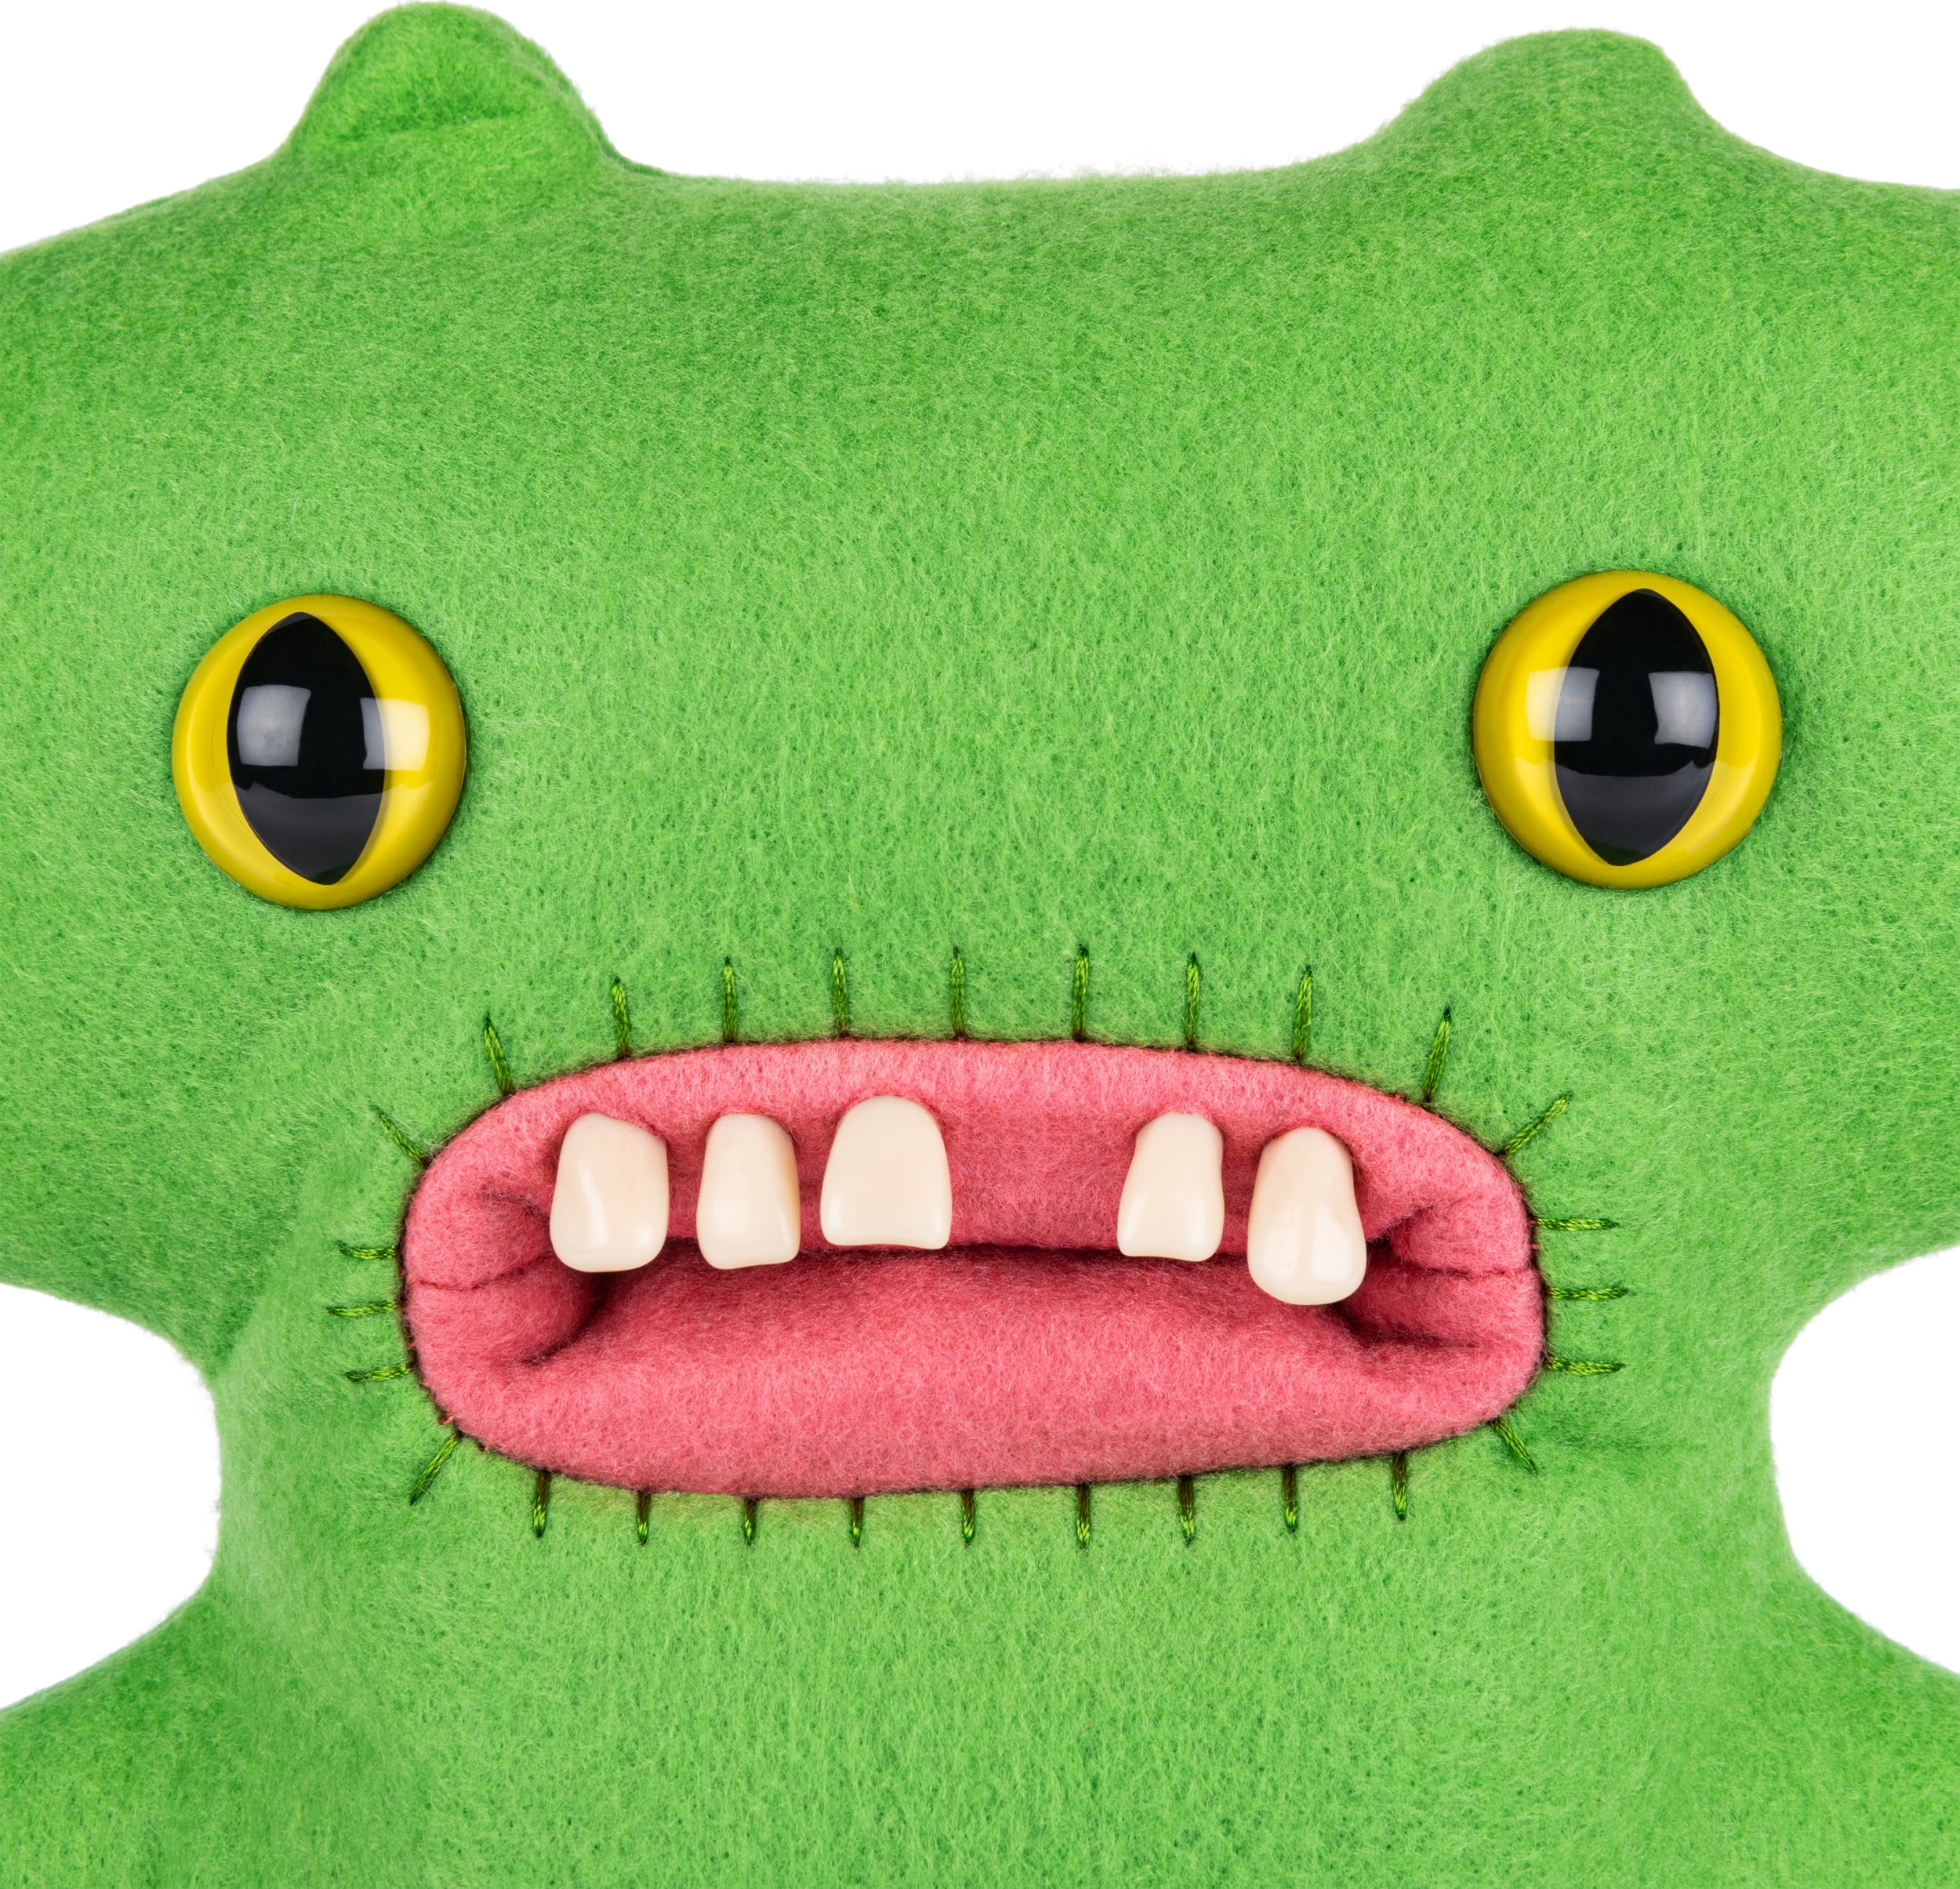 Fuggler, Funny Ugly Monster, 9 Inch Gap-Tooth McGoo (Green) Plush Creature  with Teeth, for Ages 4 and Up 